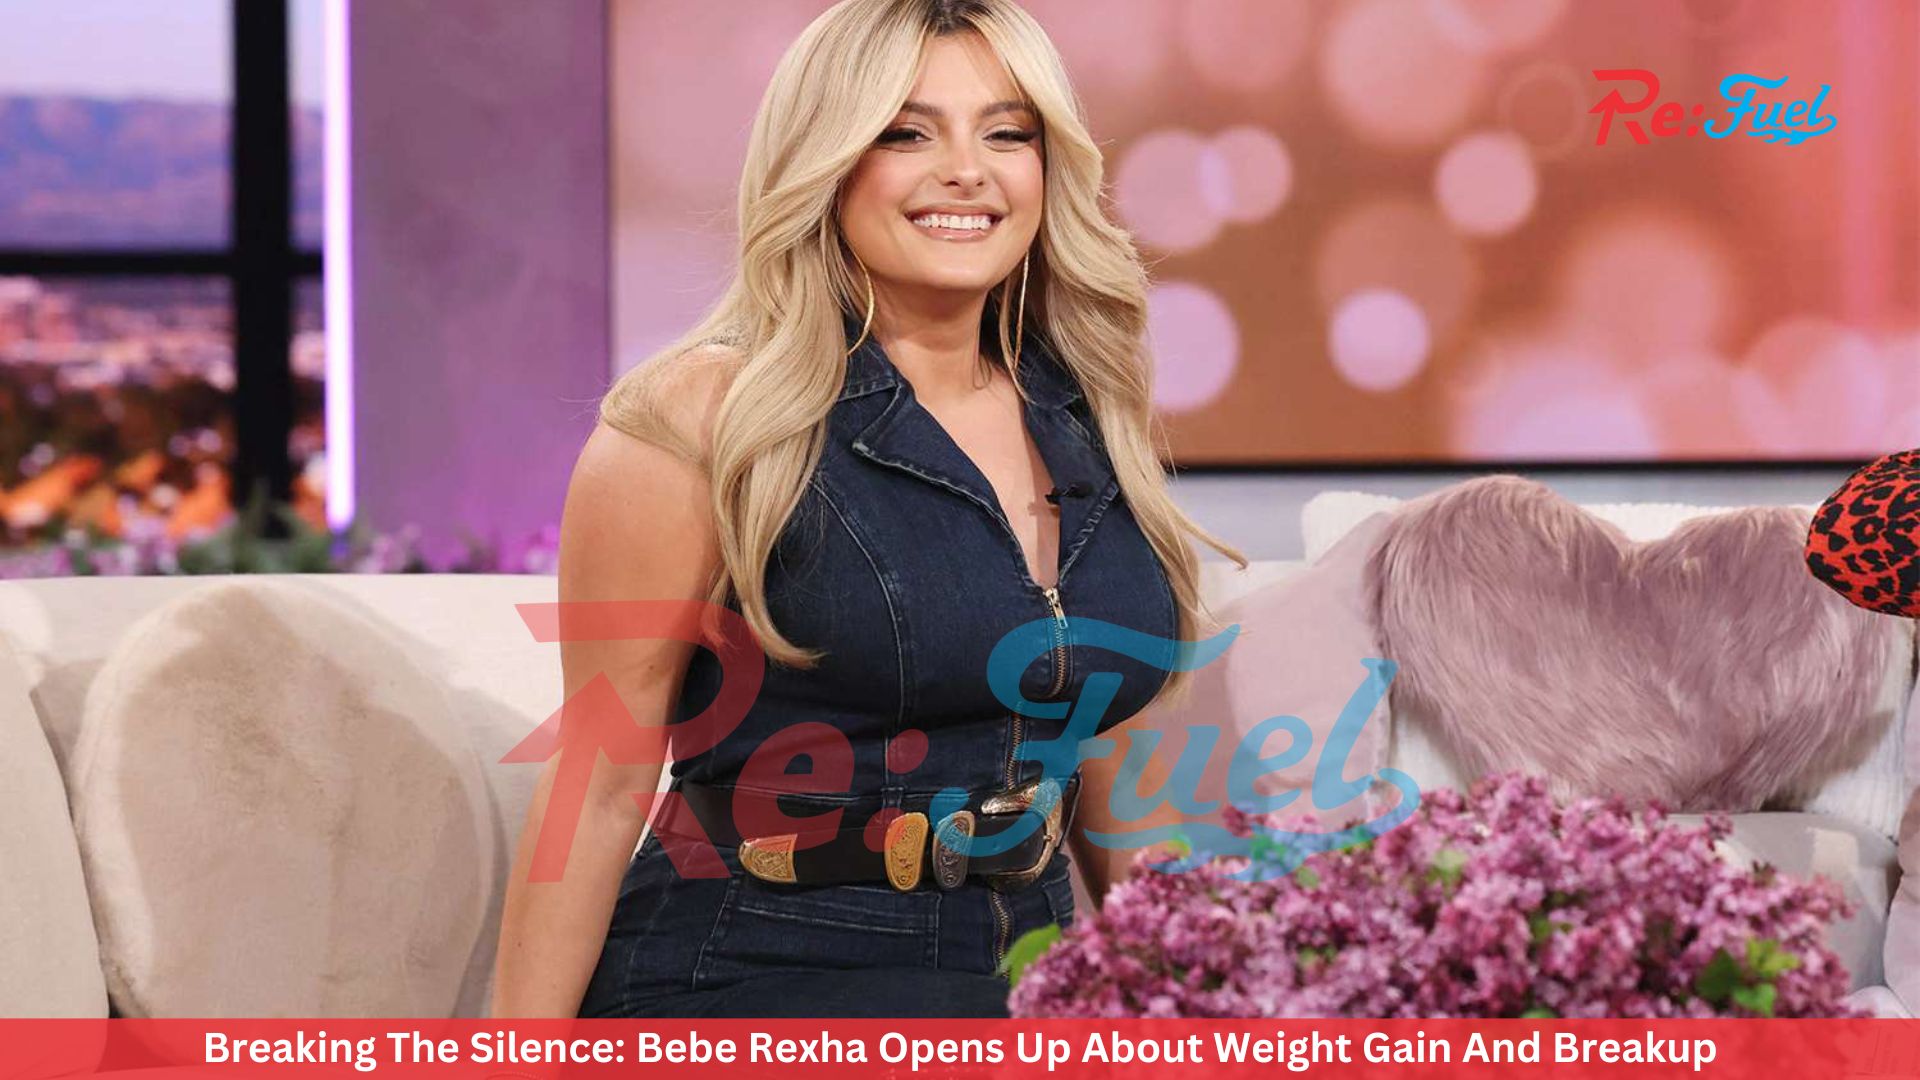 Breaking The Silence: Bebe Rexha Opens Up About Weight Gain And Breakup